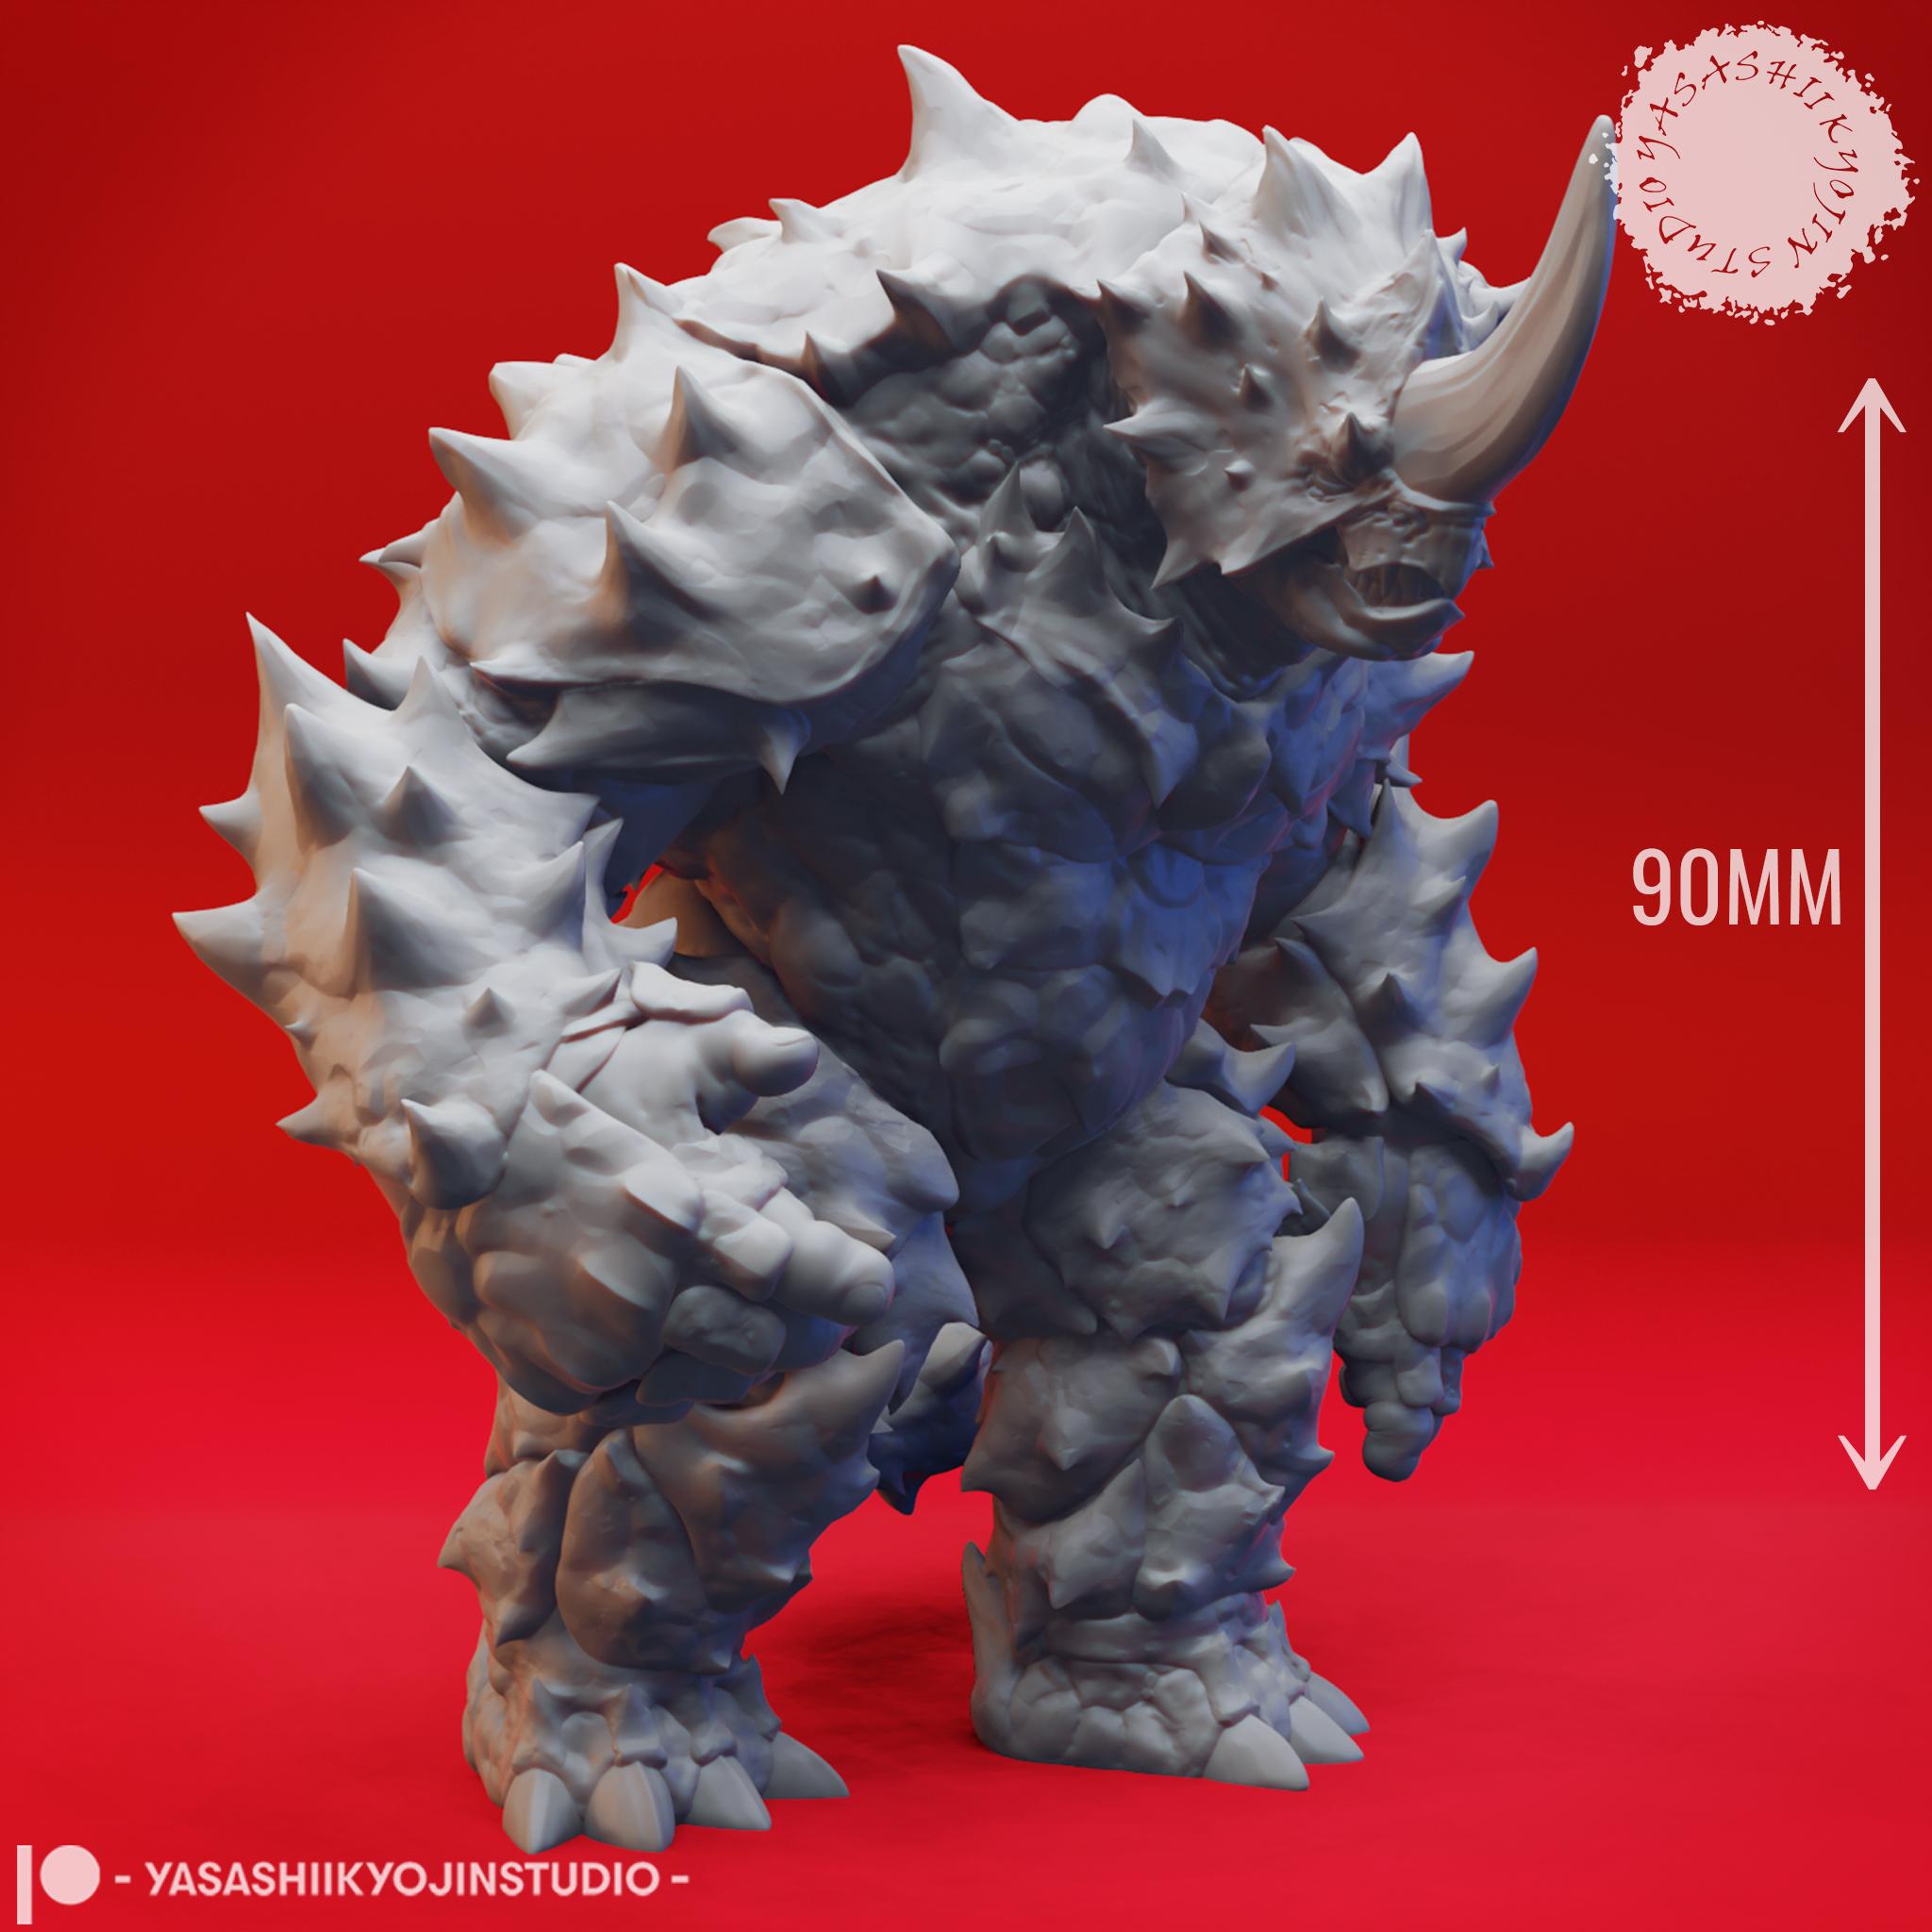 Braxat - Tabletop Miniature (Pre-Supported) 3d model